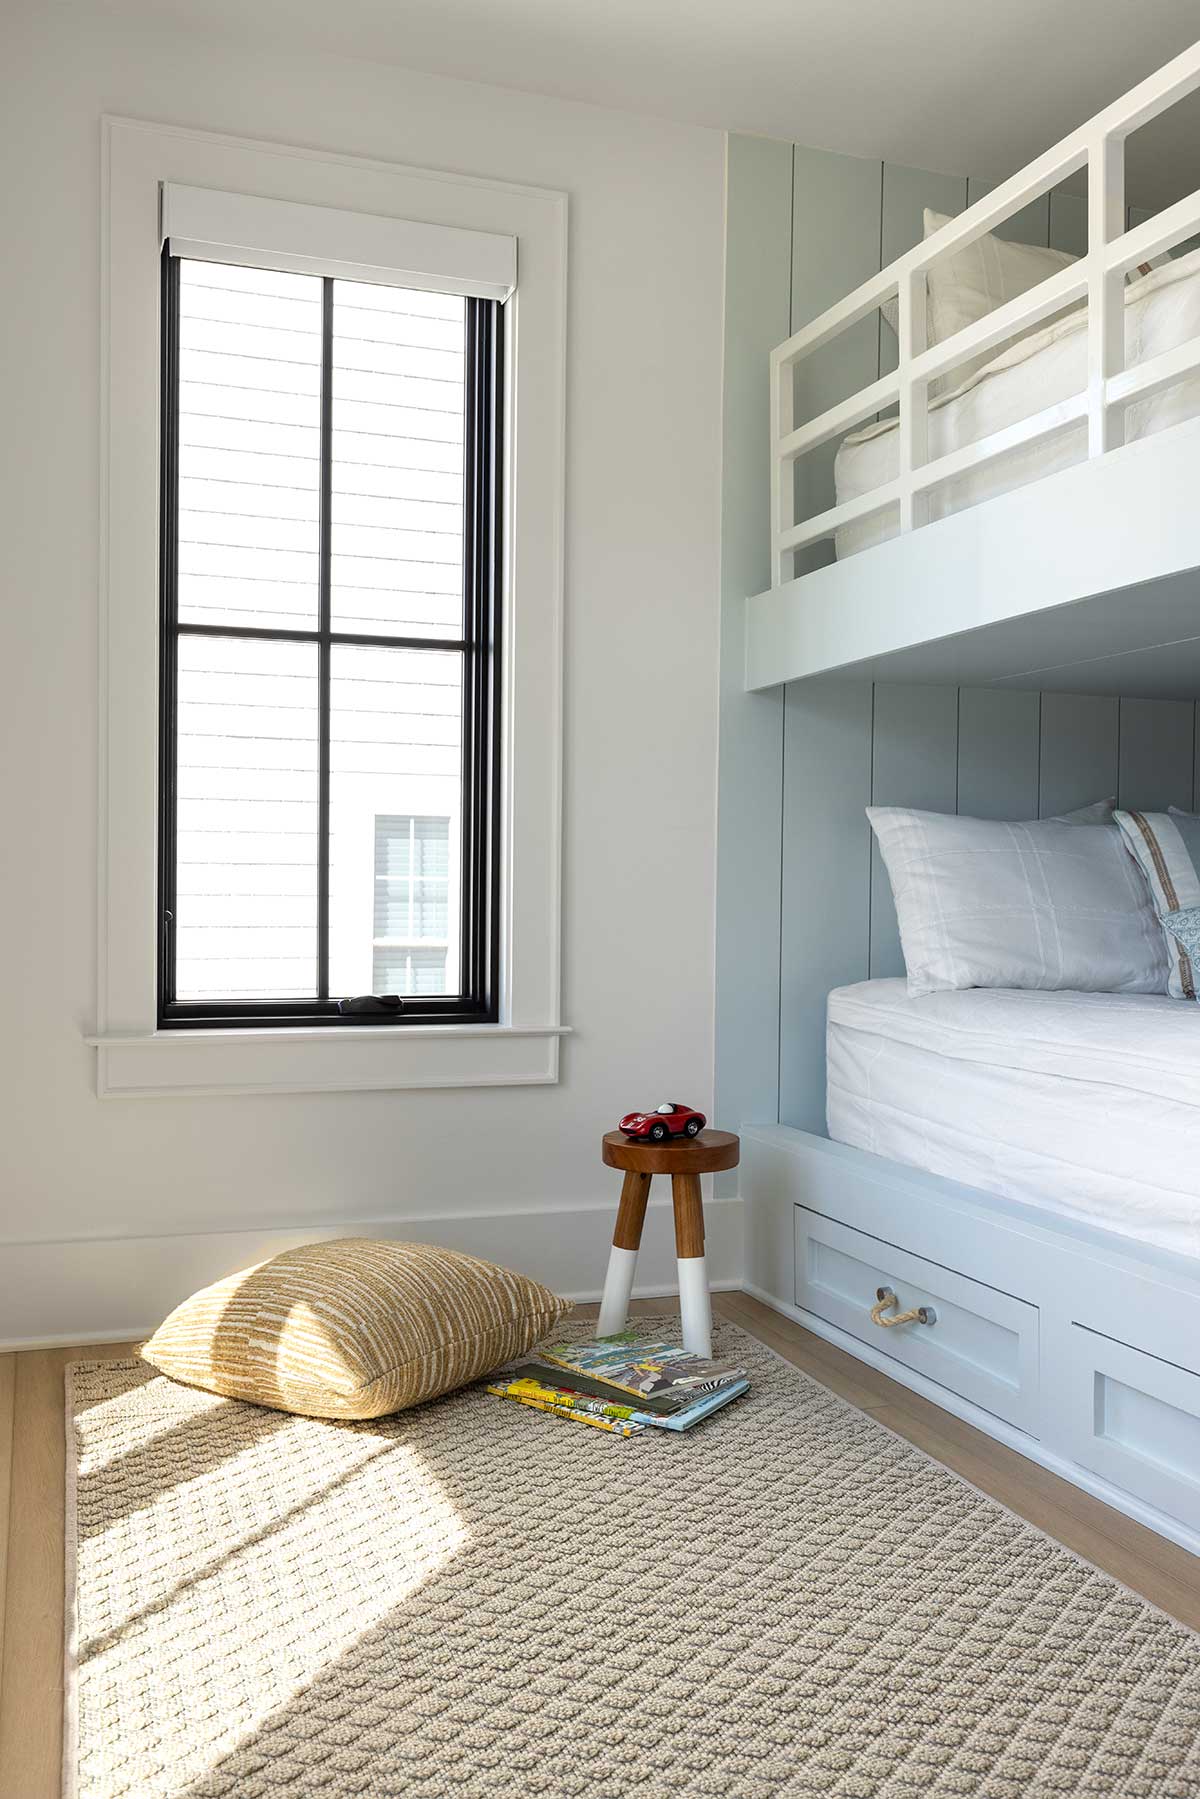 A kids' room with built-in bunk beds and a Marvin Elevate Casement window.